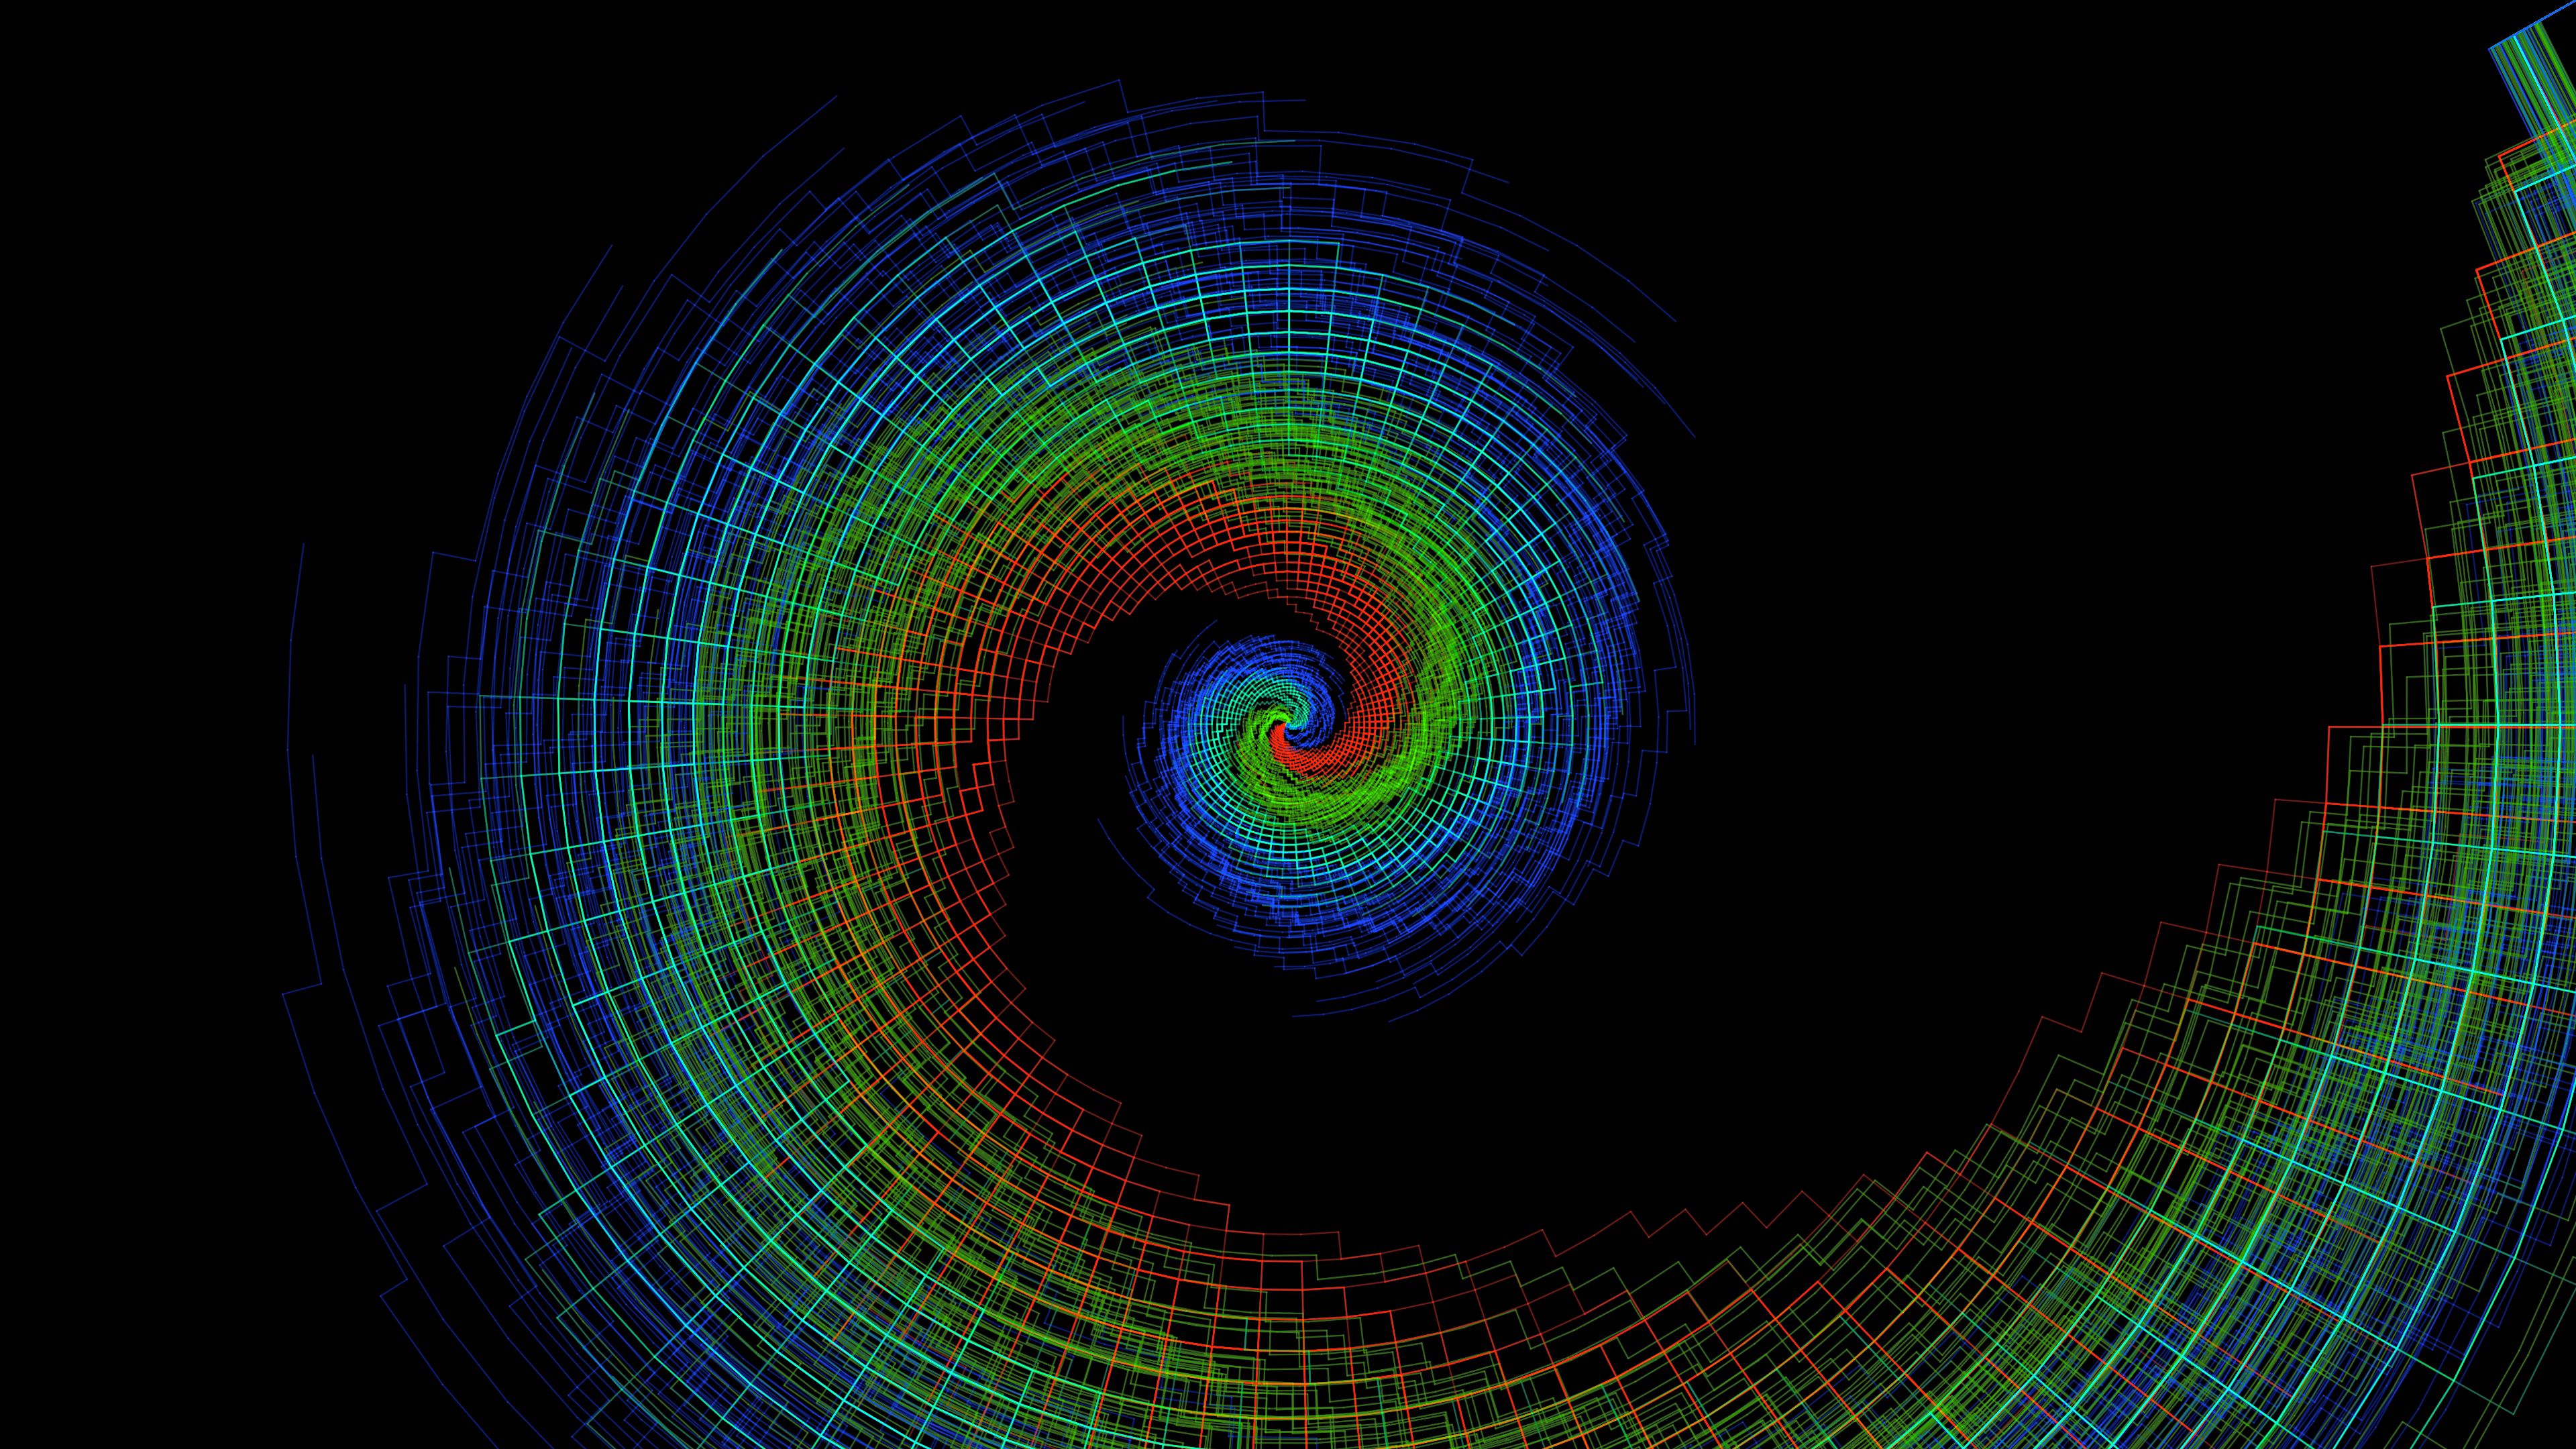 Cool Backgrounds motley, multicolored, spiral, swirling Funnel